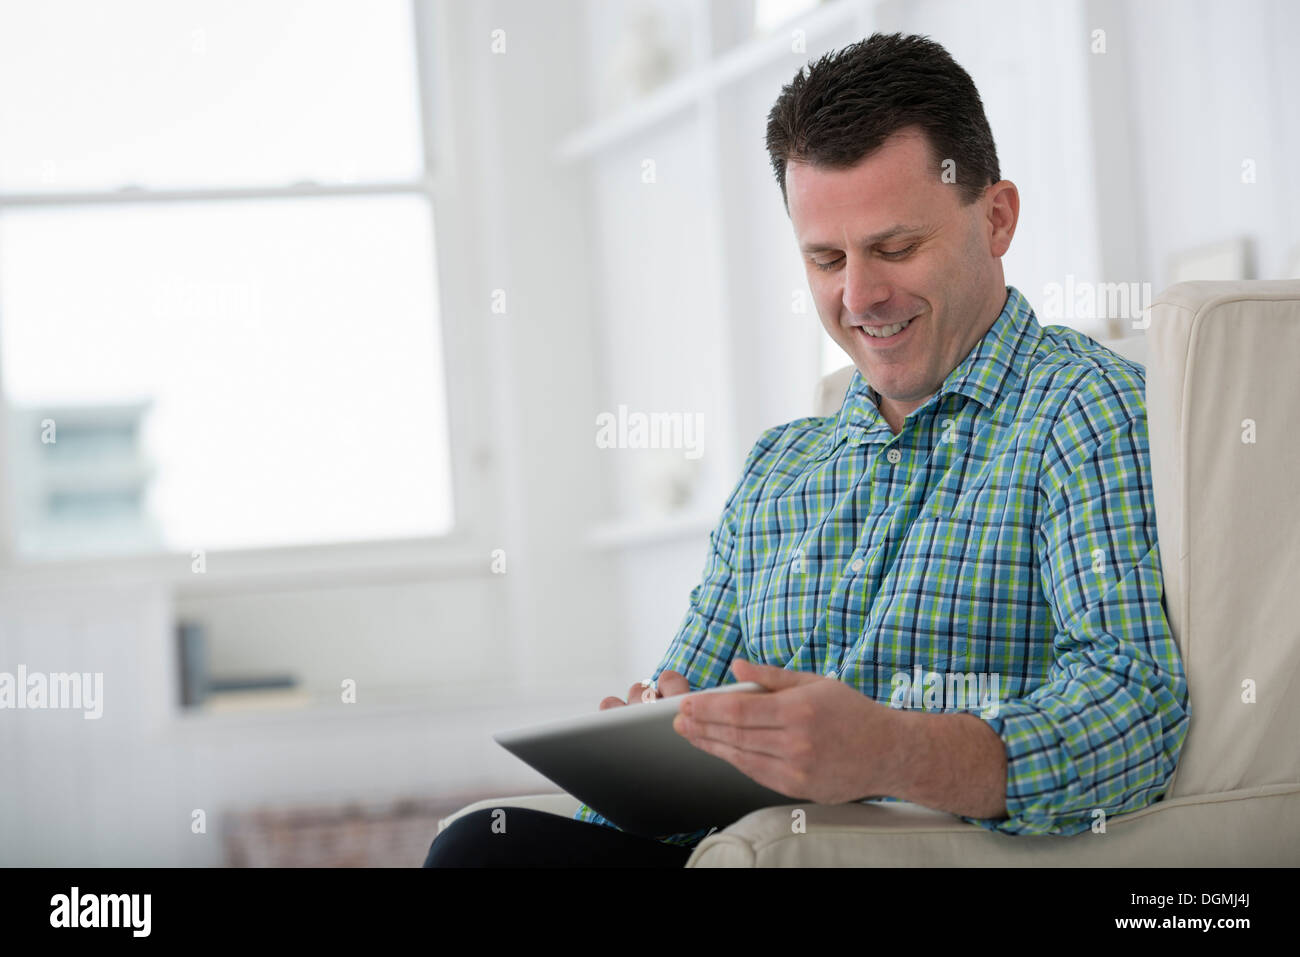 A man sitting in an armchair, using a digital tablet. Stock Photo